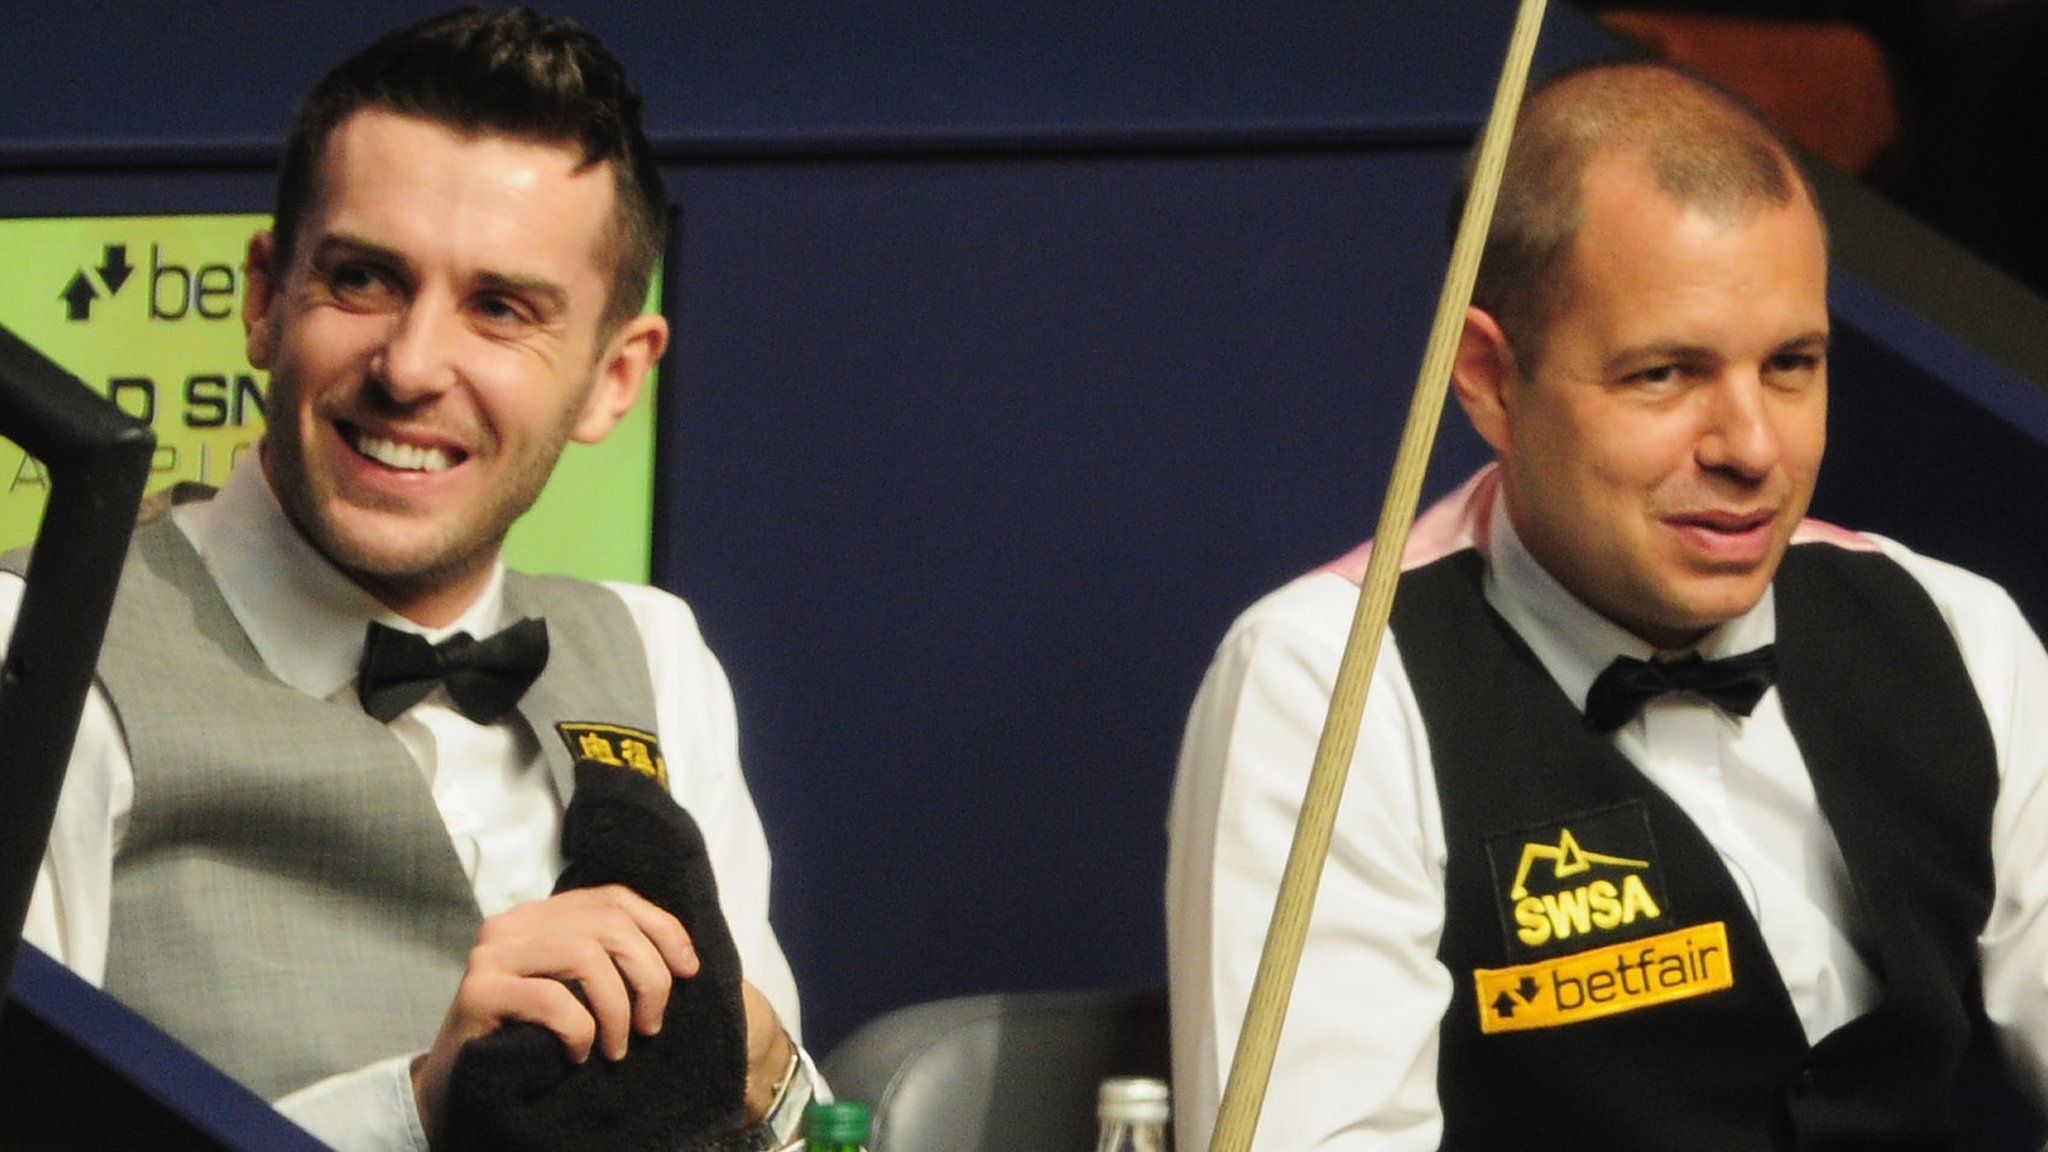 Mark Selby and Barry Hawkins